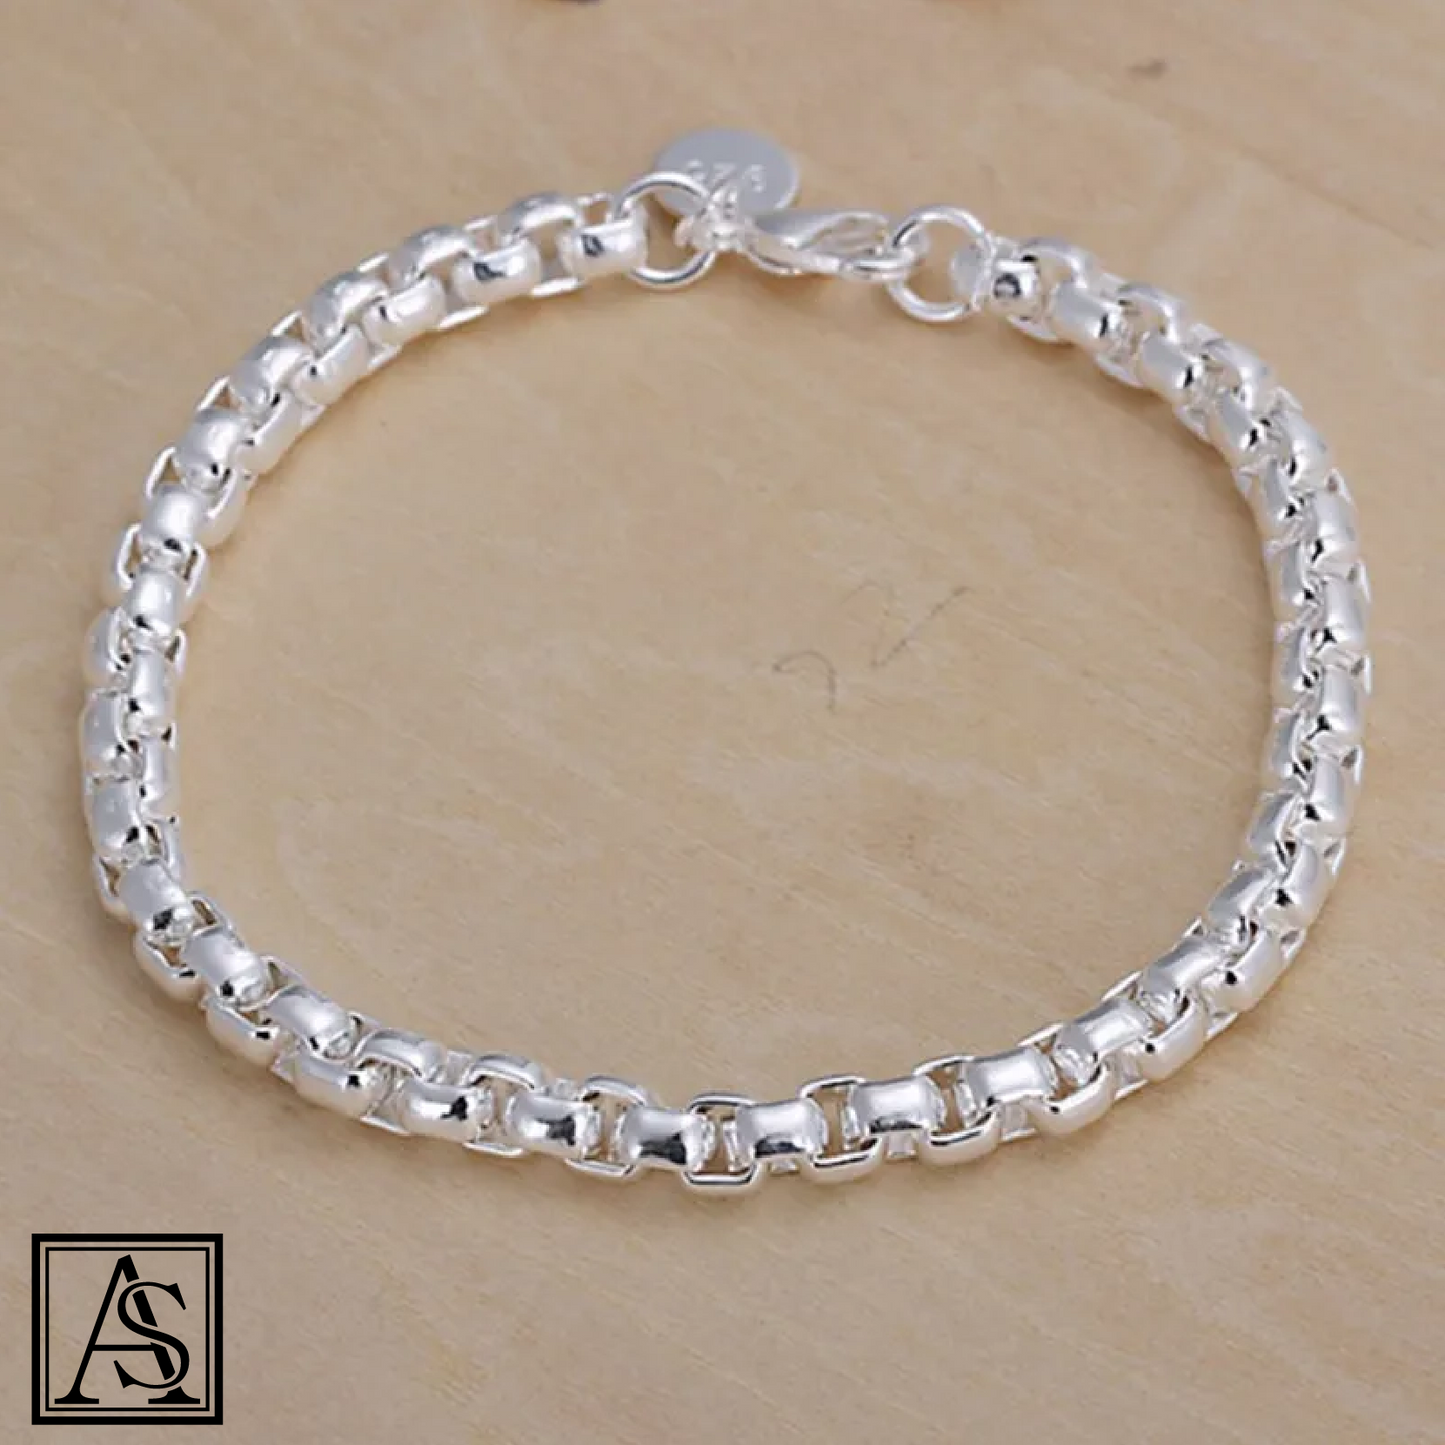 ASIL STORE : 925 Sterling Silver Square Solid Chain Bracelet For Women Men ( Free shipping )
Model number : 301